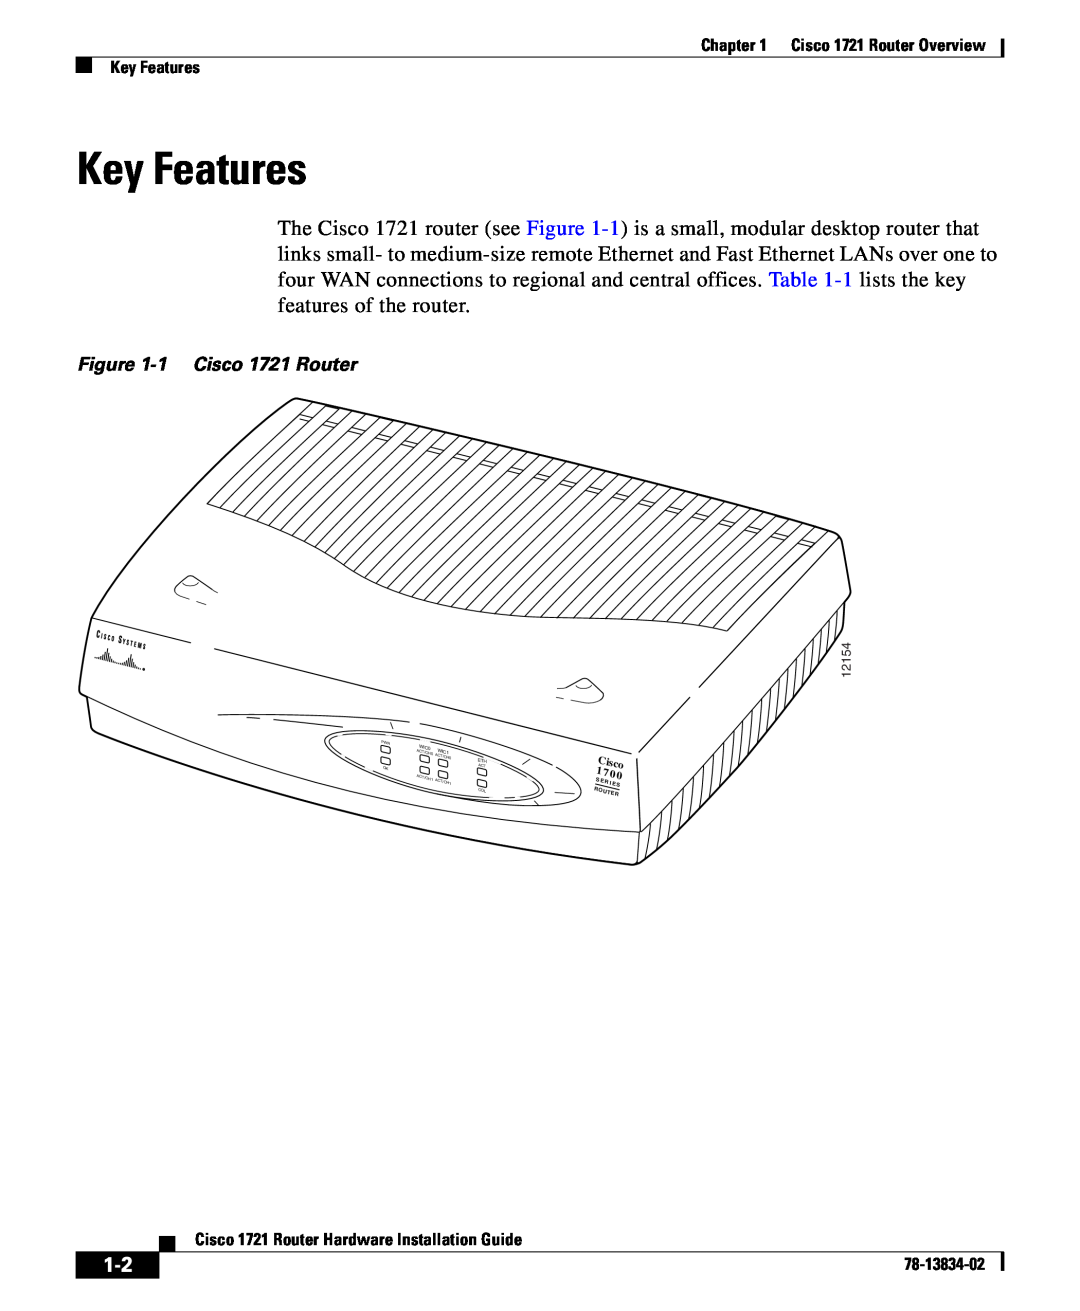 Cisco Systems manual Key Features, 1 Cisco 1721 Router 